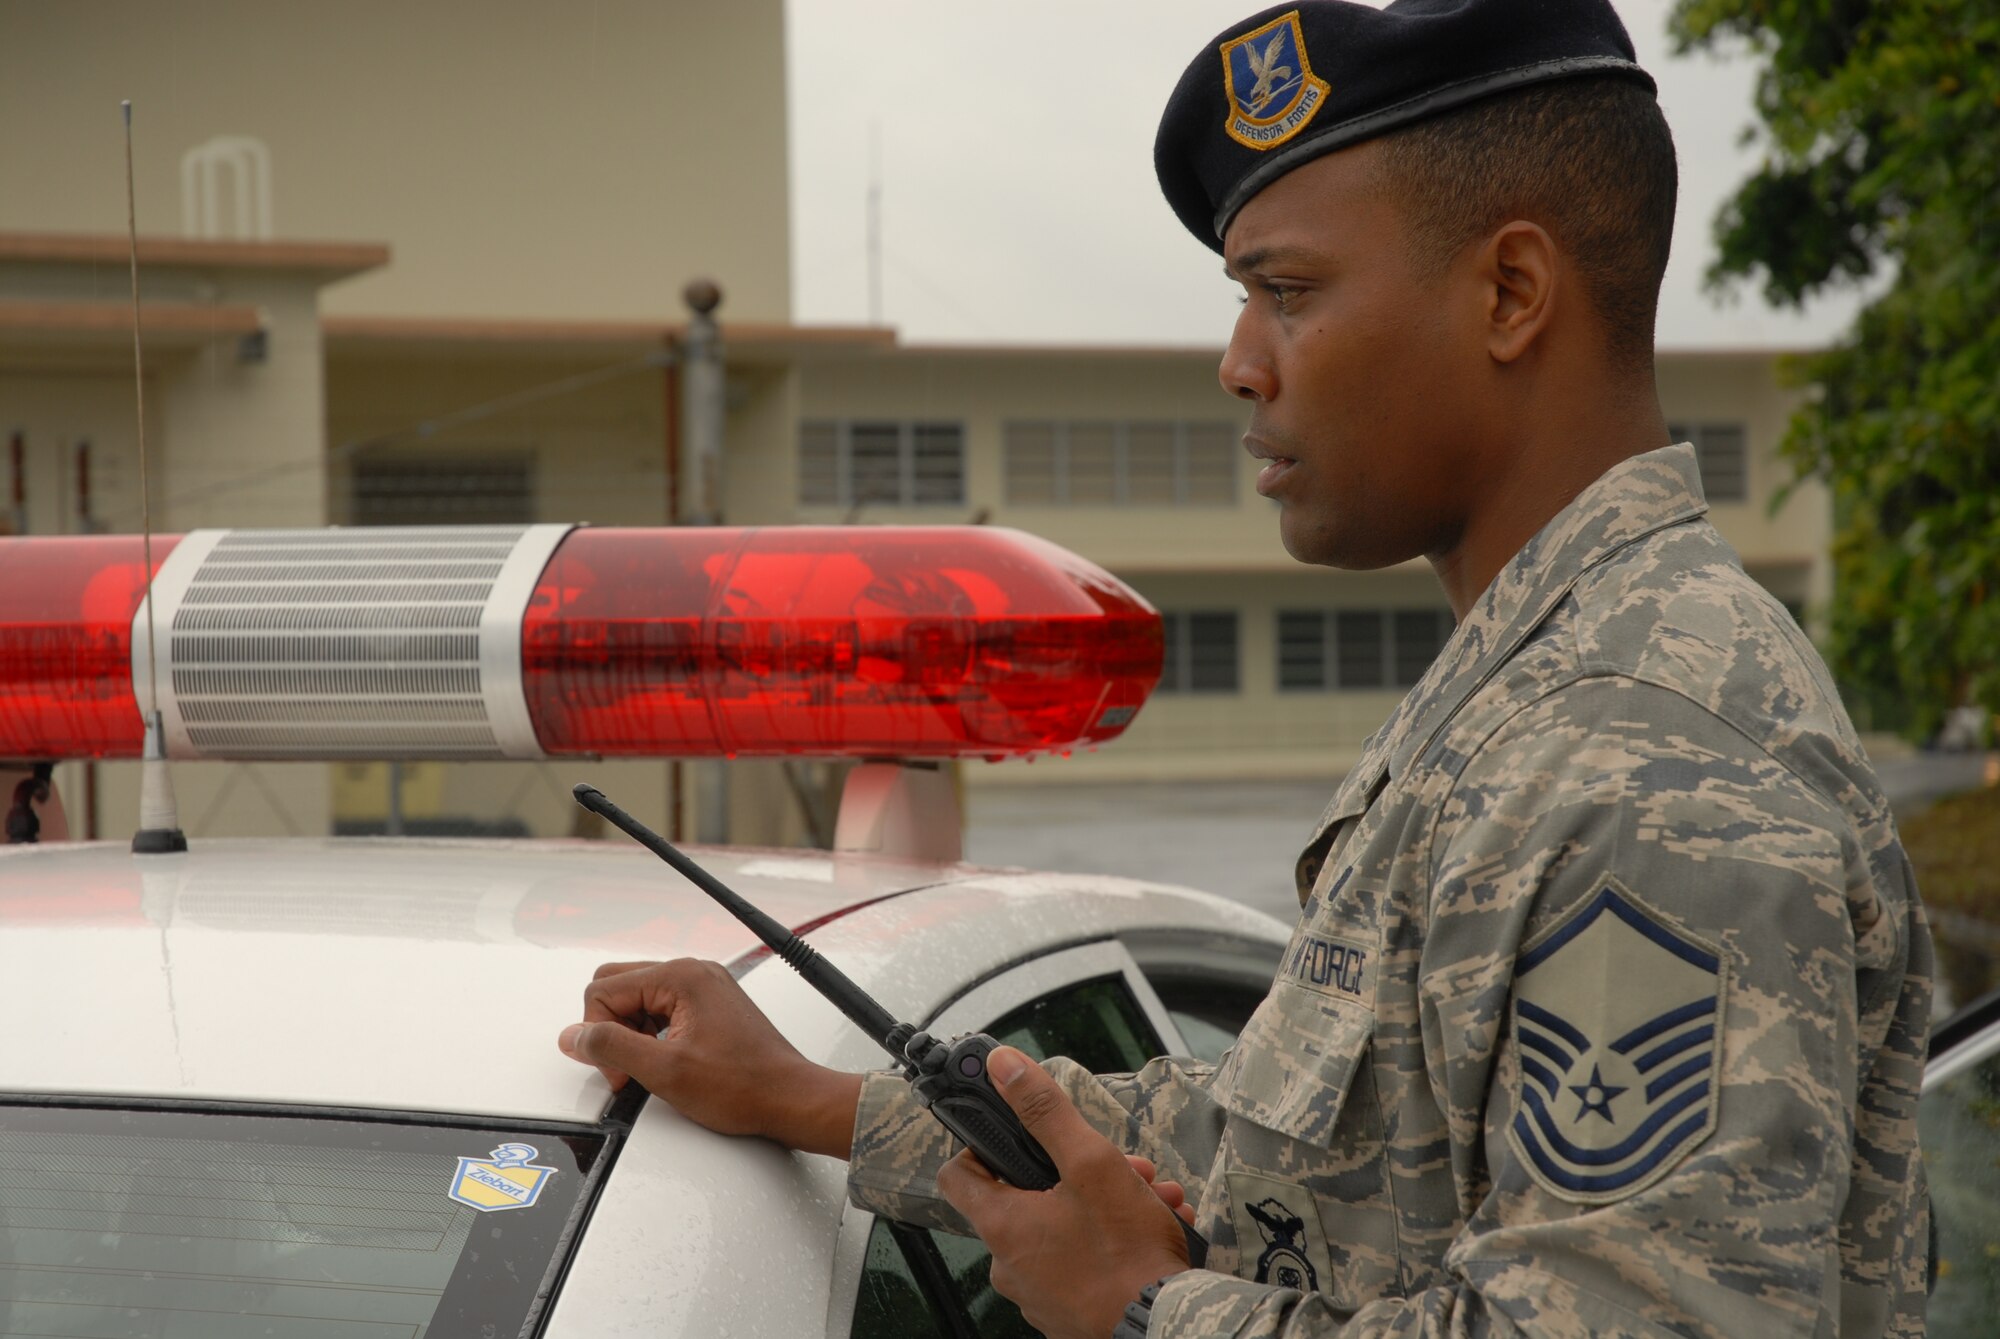 Master Sgt. Anthony Johnson, 18th Security Forces Squadron, awaits the call from the Law Enforcement Desk to determine the next course of action in a hostile situation at the 18th Comptroller Squadron, during the 2008 Pacific Air Forces Operational Readiness Inspection at Kadena Air Base, Japan, March 11, 2008. PACAF is conducting the inspection from March 9 to 15 to validate the mission readiness of the 18th Wing. (U.S. Air Force photo/Staff Sgt. Chrissy FitzGerald)
